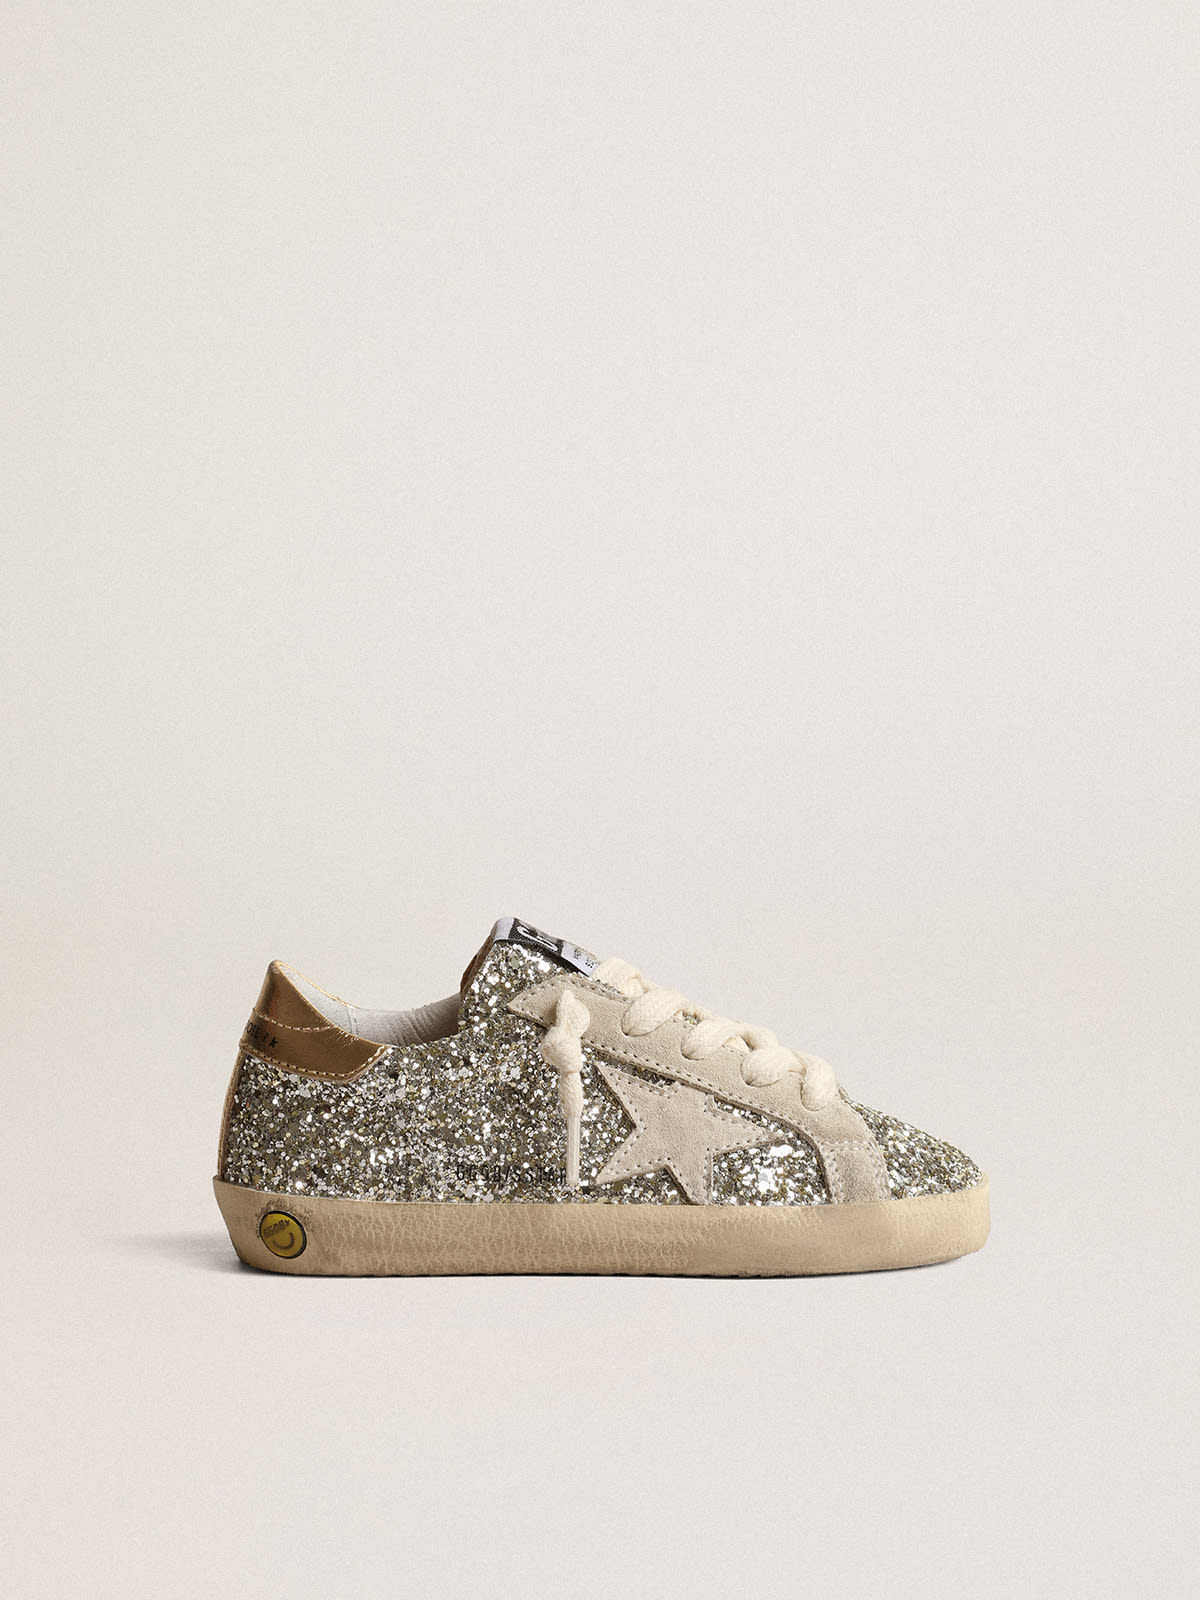 Golden Goose - Super-Star Young in glitter with a suede star and gold heel tab in 